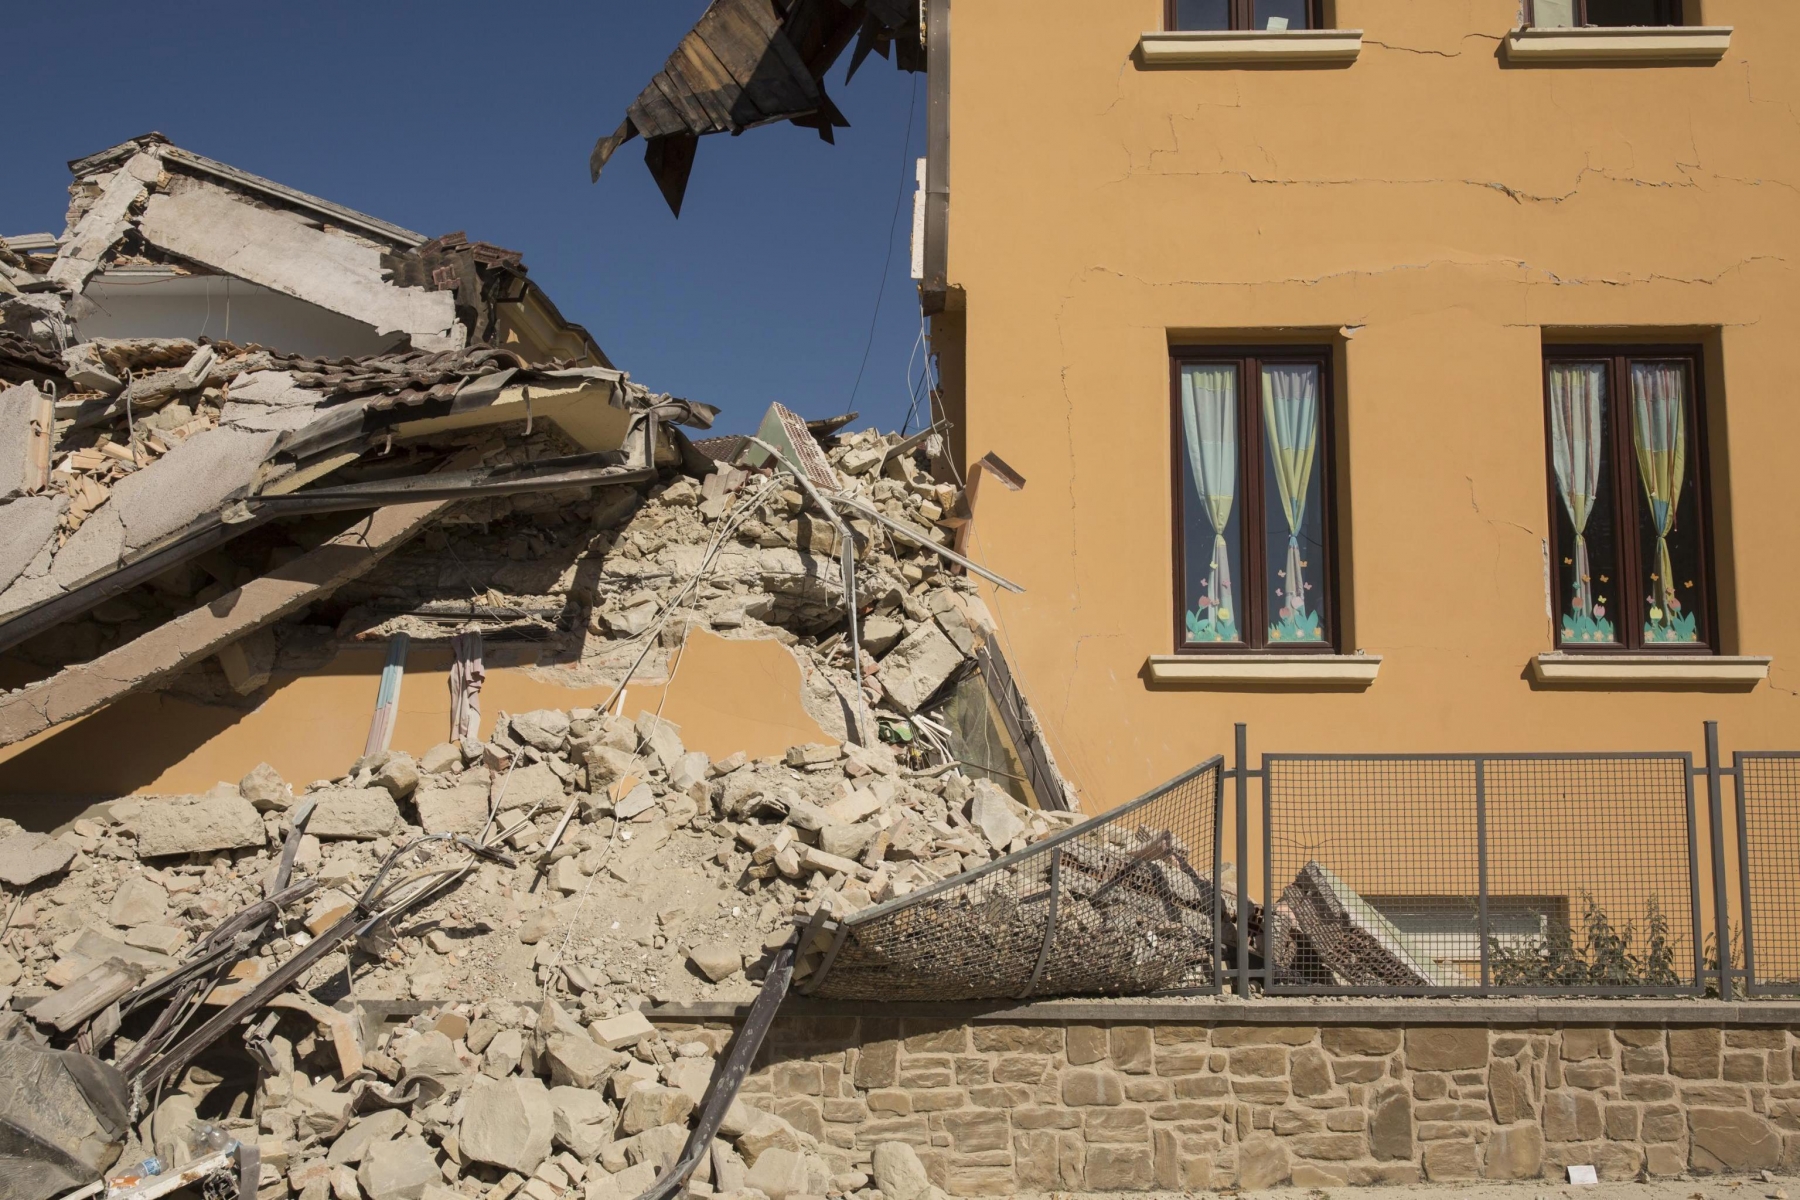 epa05513207 The Romolo Capranica school, partially collapsed after the 24 August devastating earthquake, in the Lazio mountain village of Amatrice, central Italy, 28 August 2016. The Civil Protection Department said on 28 August that the latest provisional death toll from the earthquake in central Italy is 291.  EPA/ROBERTO SALOMONE ITALY EARTHQUAKE AFTERMATH